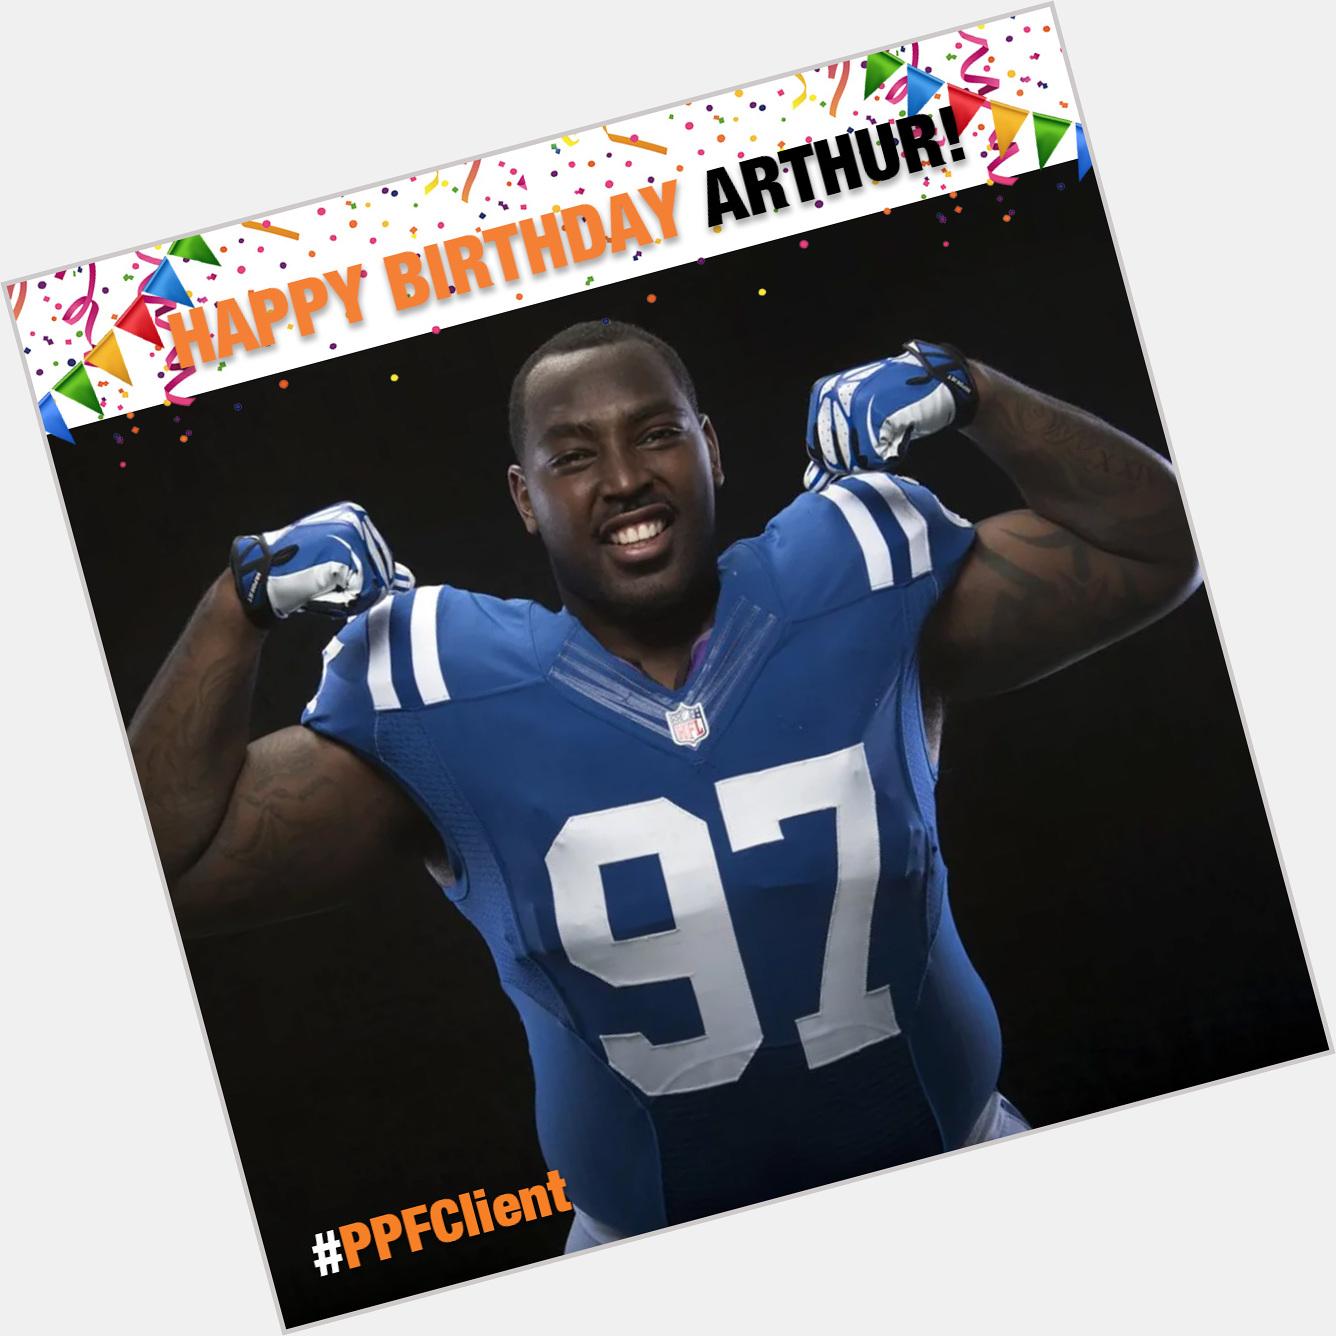 Wishing a very happy birthday to Super Bowl Champion and Arthur Jones ( Have a great day Arthur! 